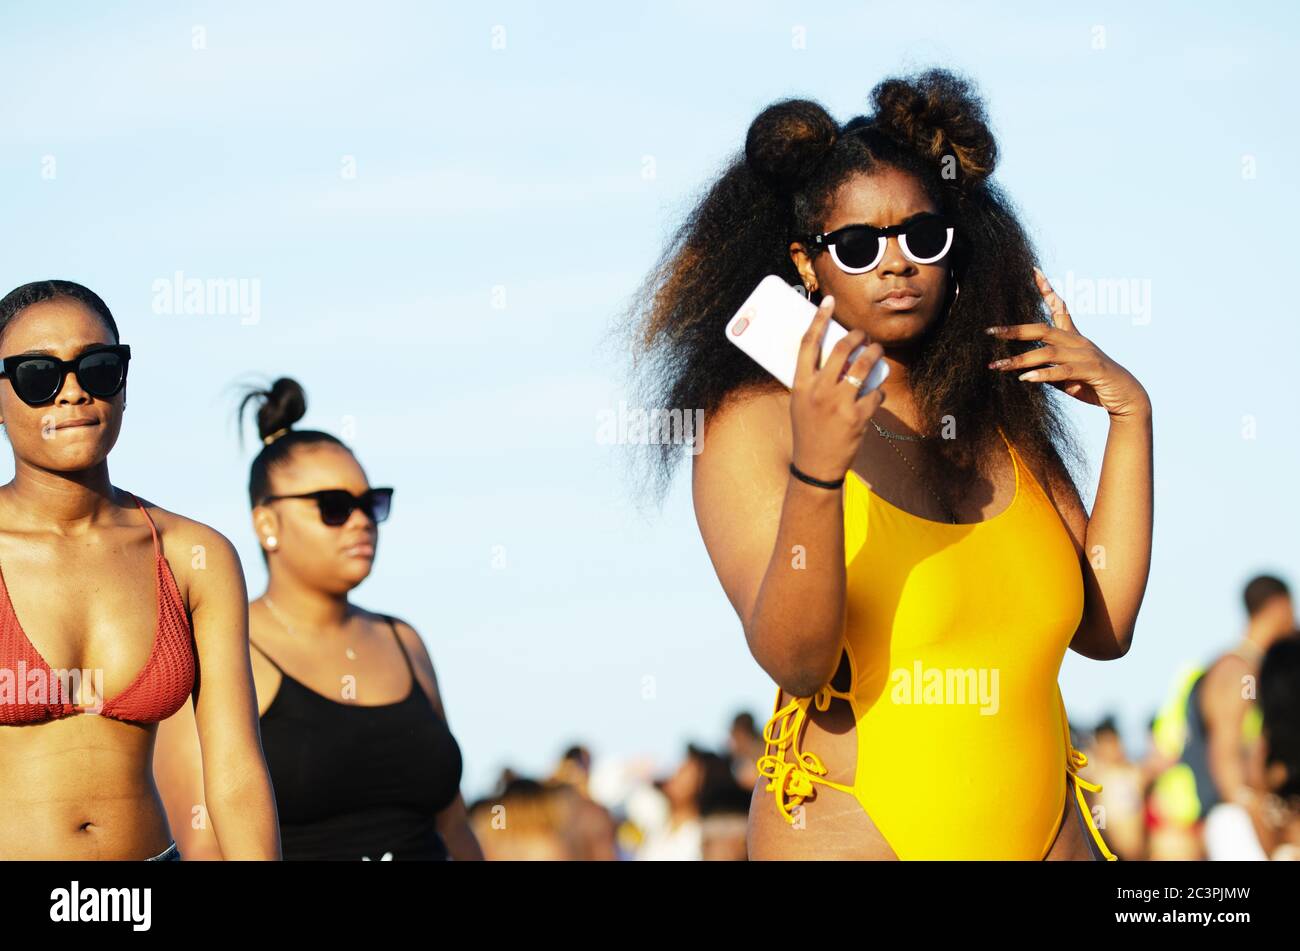 MIAMI - MARCH 16, 2019: Young people flock to South Beach to celebrate Spring Break. Stock Photo